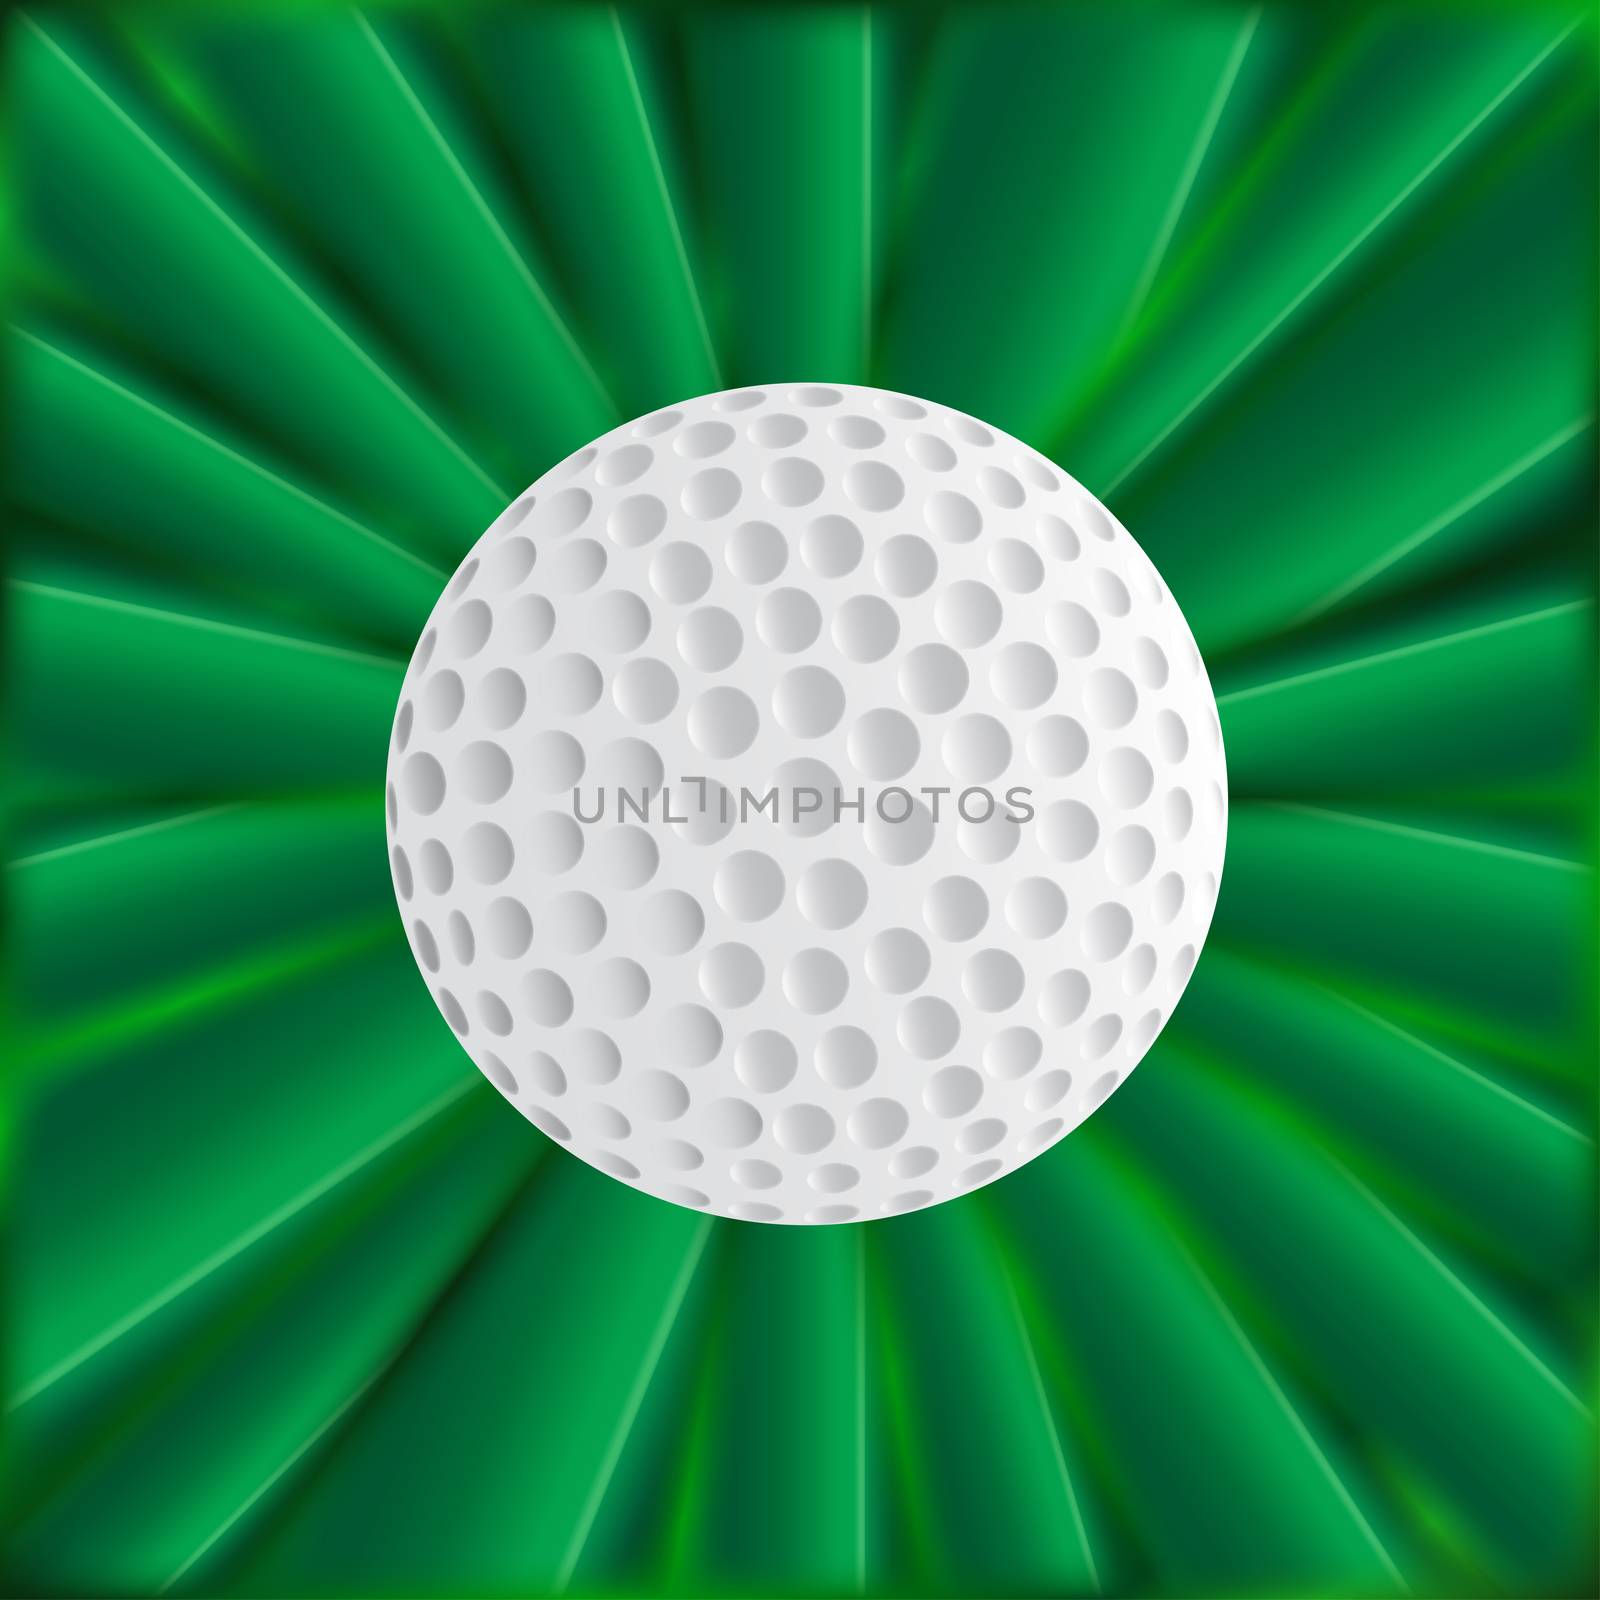 A typical golfball over a green material background